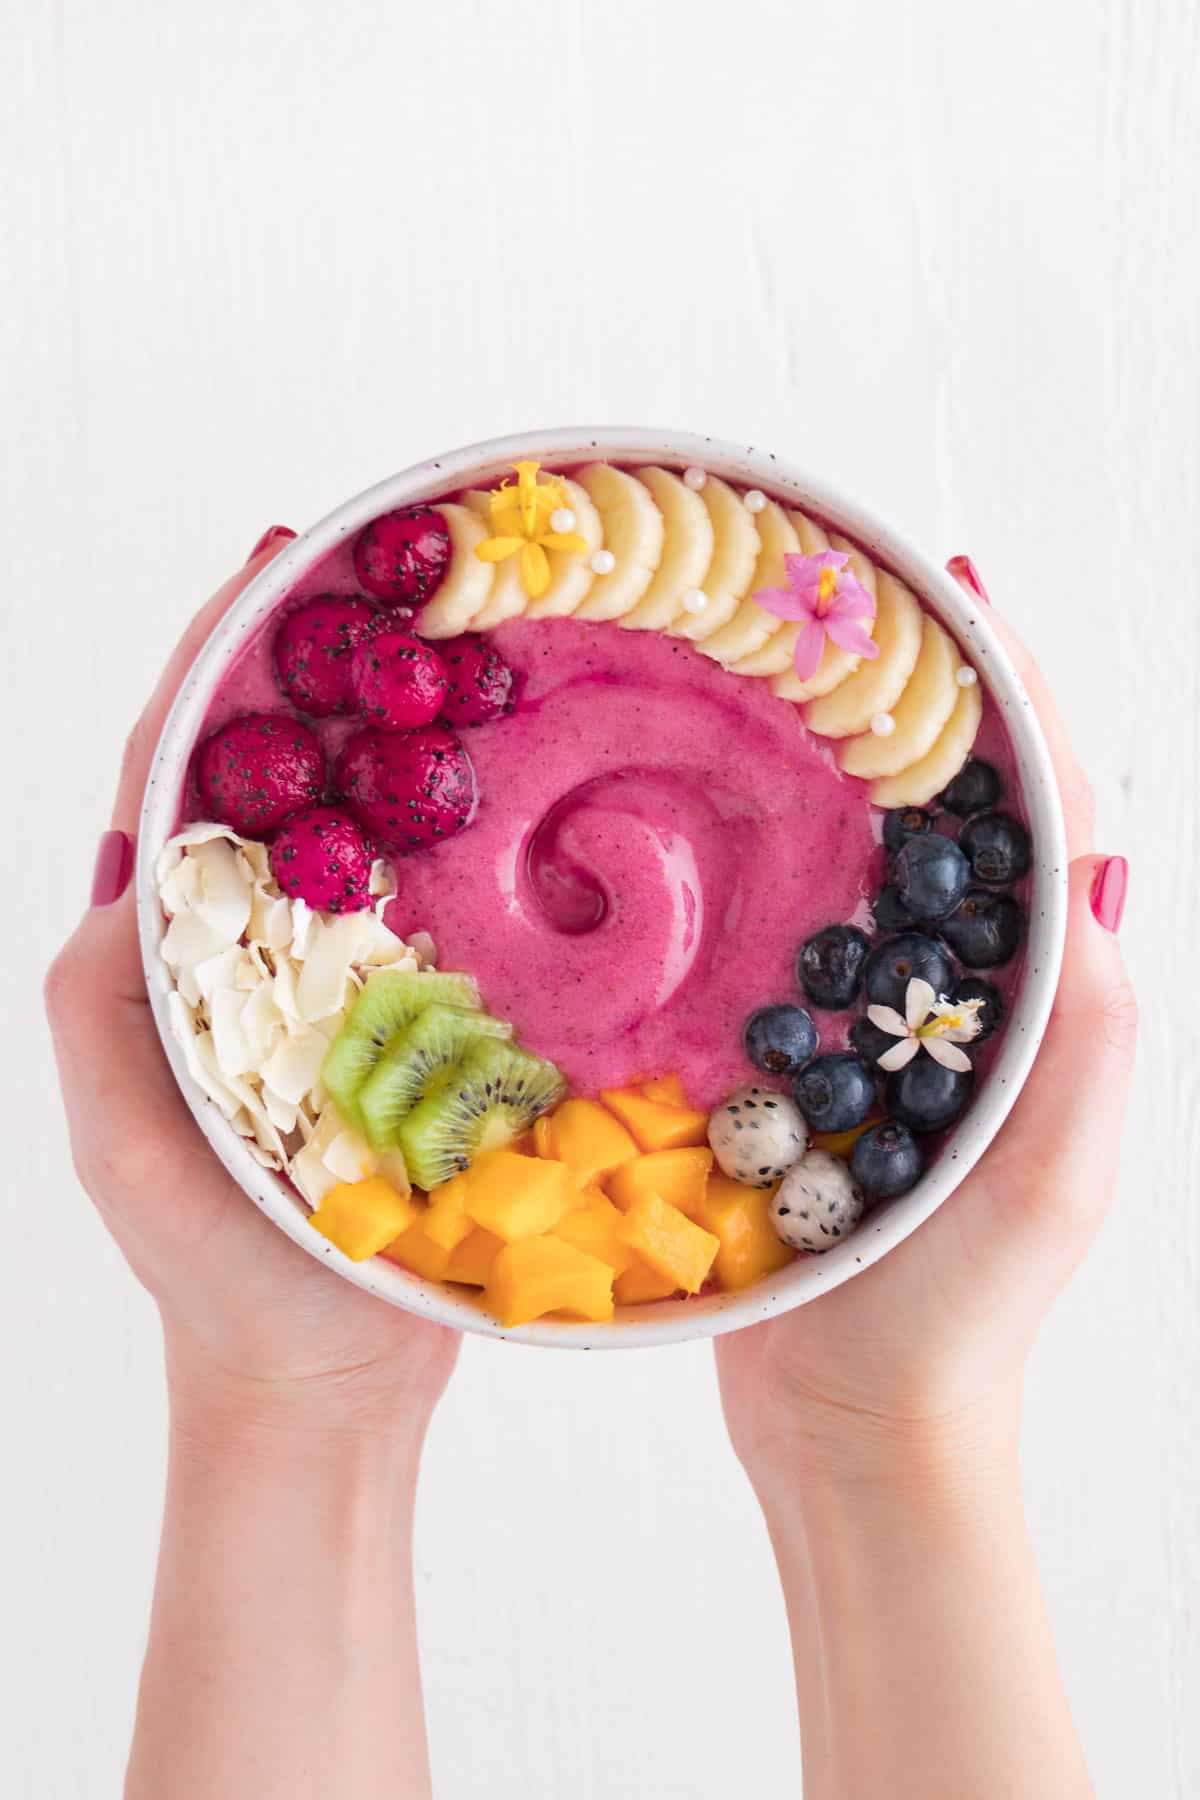 two hands holding a pink smoothie topped with with mango, kiwi, berries, banana, and coconut flakes inside a ceramic dish